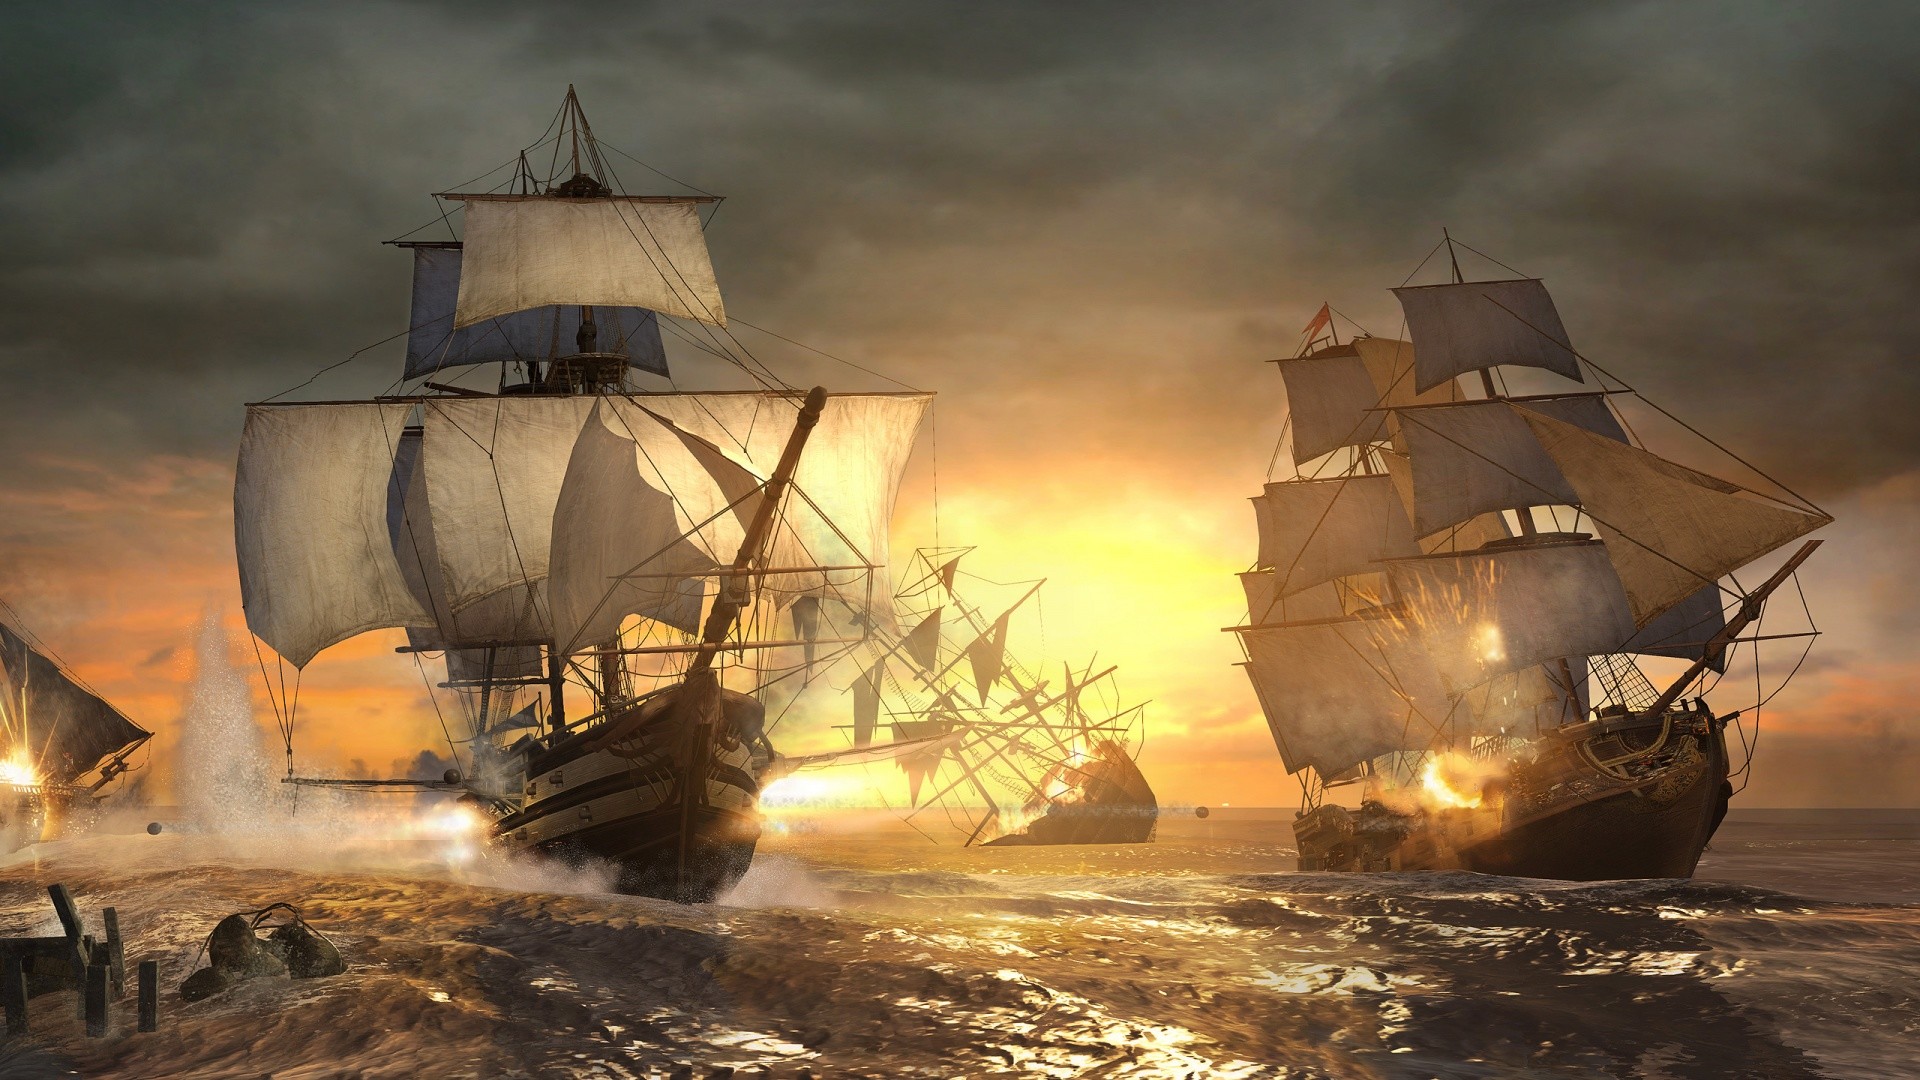 1920x1080 Assassins Creed 3 Naval Wallpaper in 